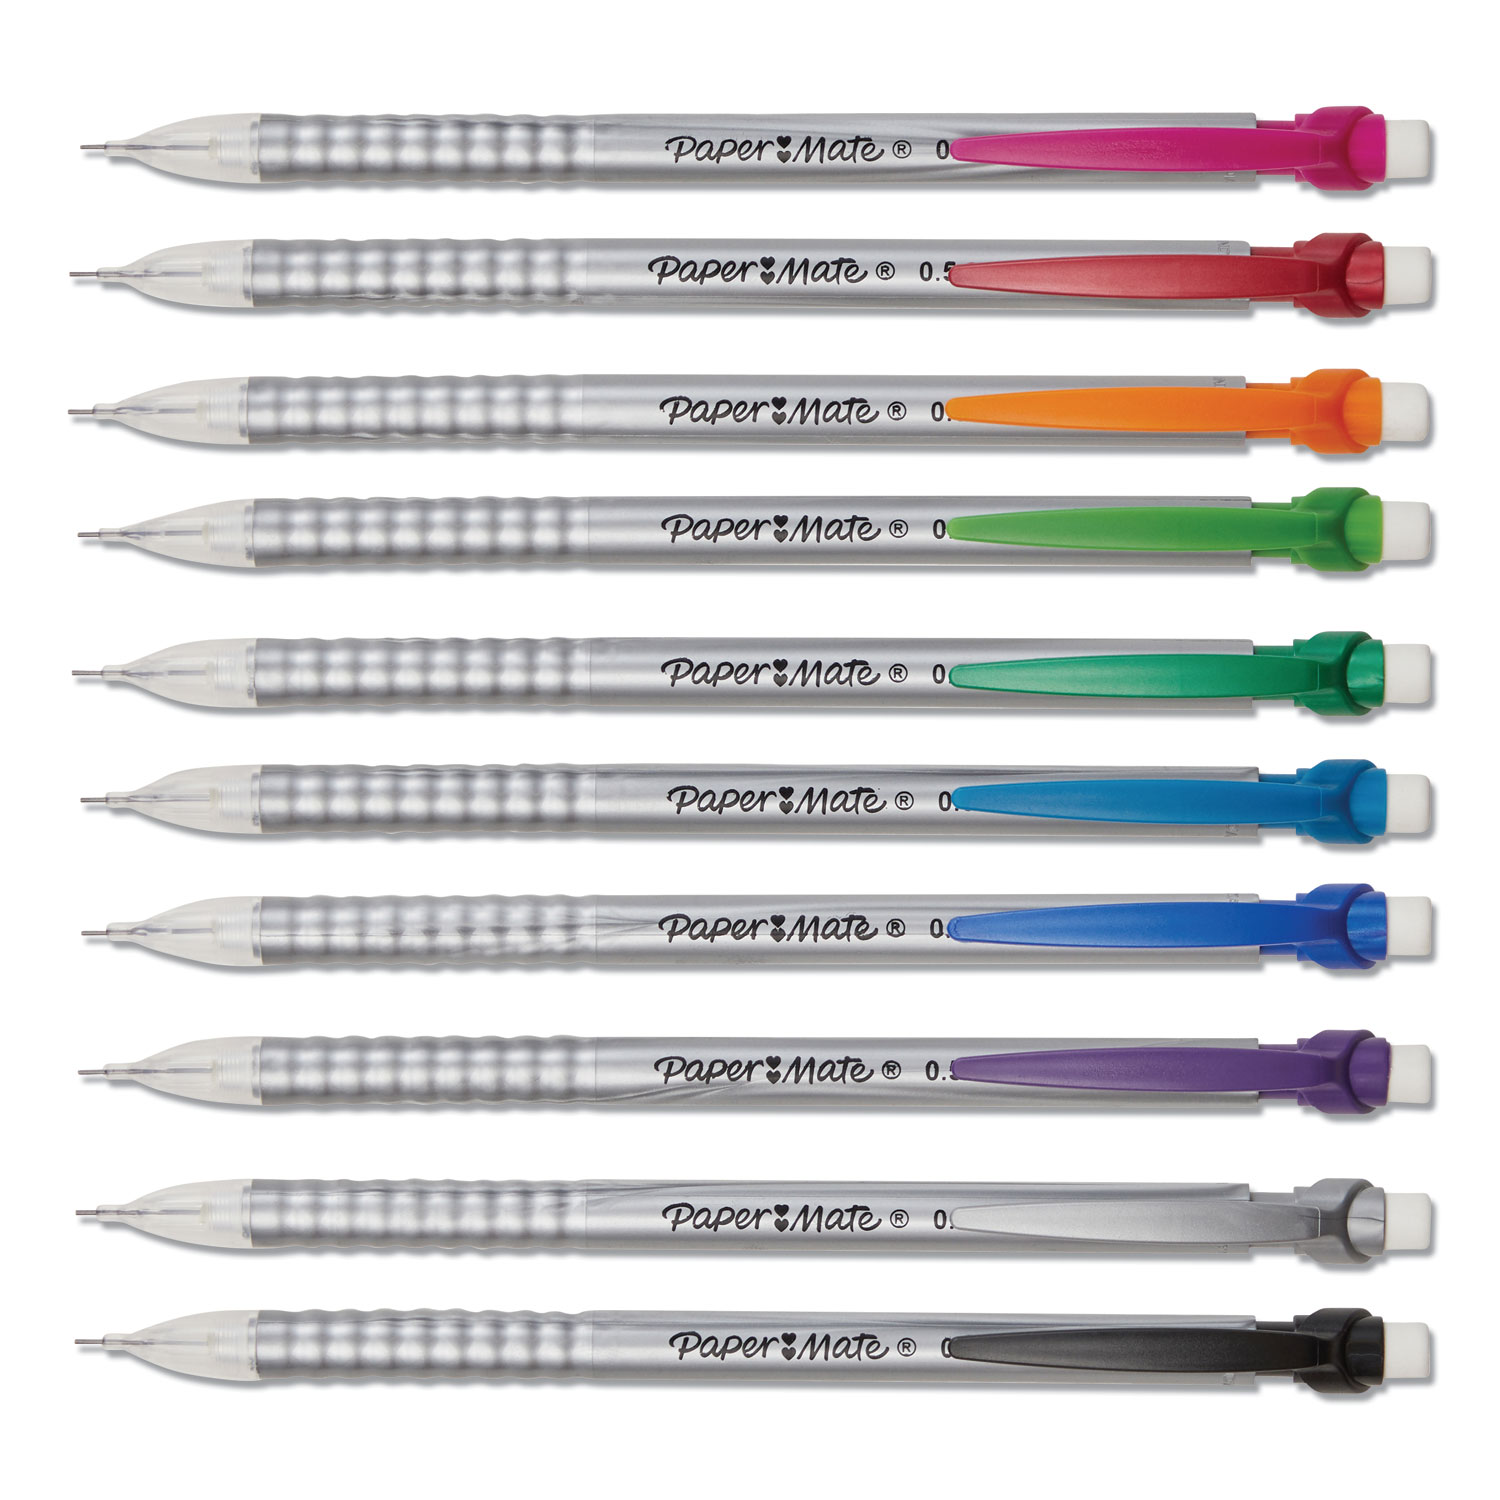  Paper Mate 2096303 Write Bros Mechanical Pencil, 0.5 mm, HB (#2), Black Lead, Silver Barrel with Assorted Clip Colors, 24/Pack (PAP2096303) 